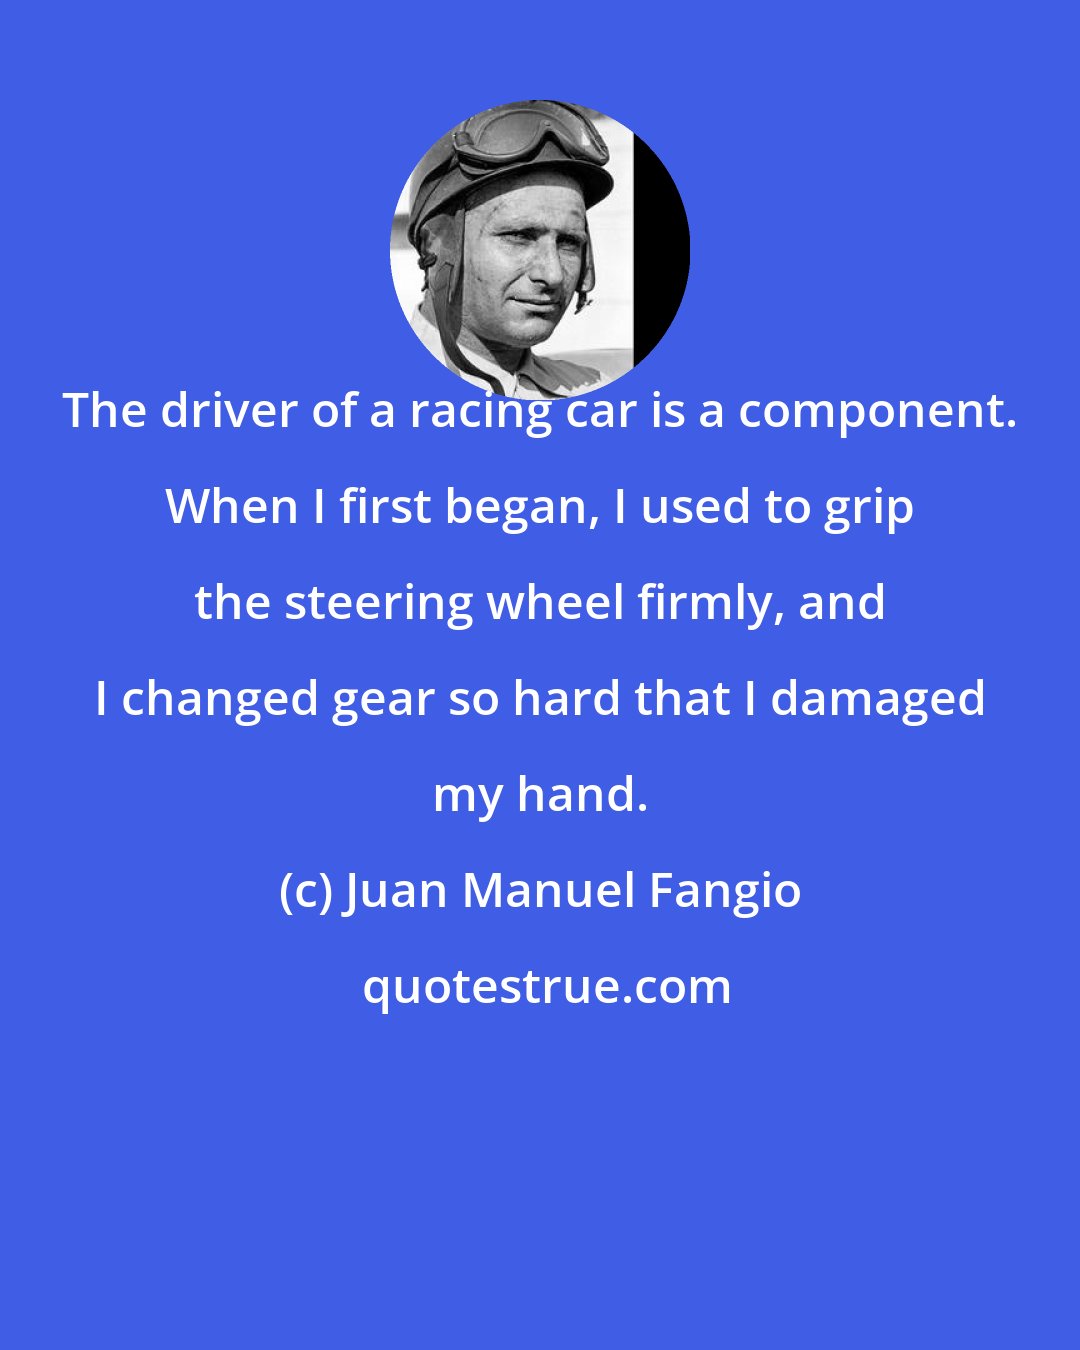 Juan Manuel Fangio: The driver of a racing car is a component. When I first began, I used to grip the steering wheel firmly, and I changed gear so hard that I damaged my hand.